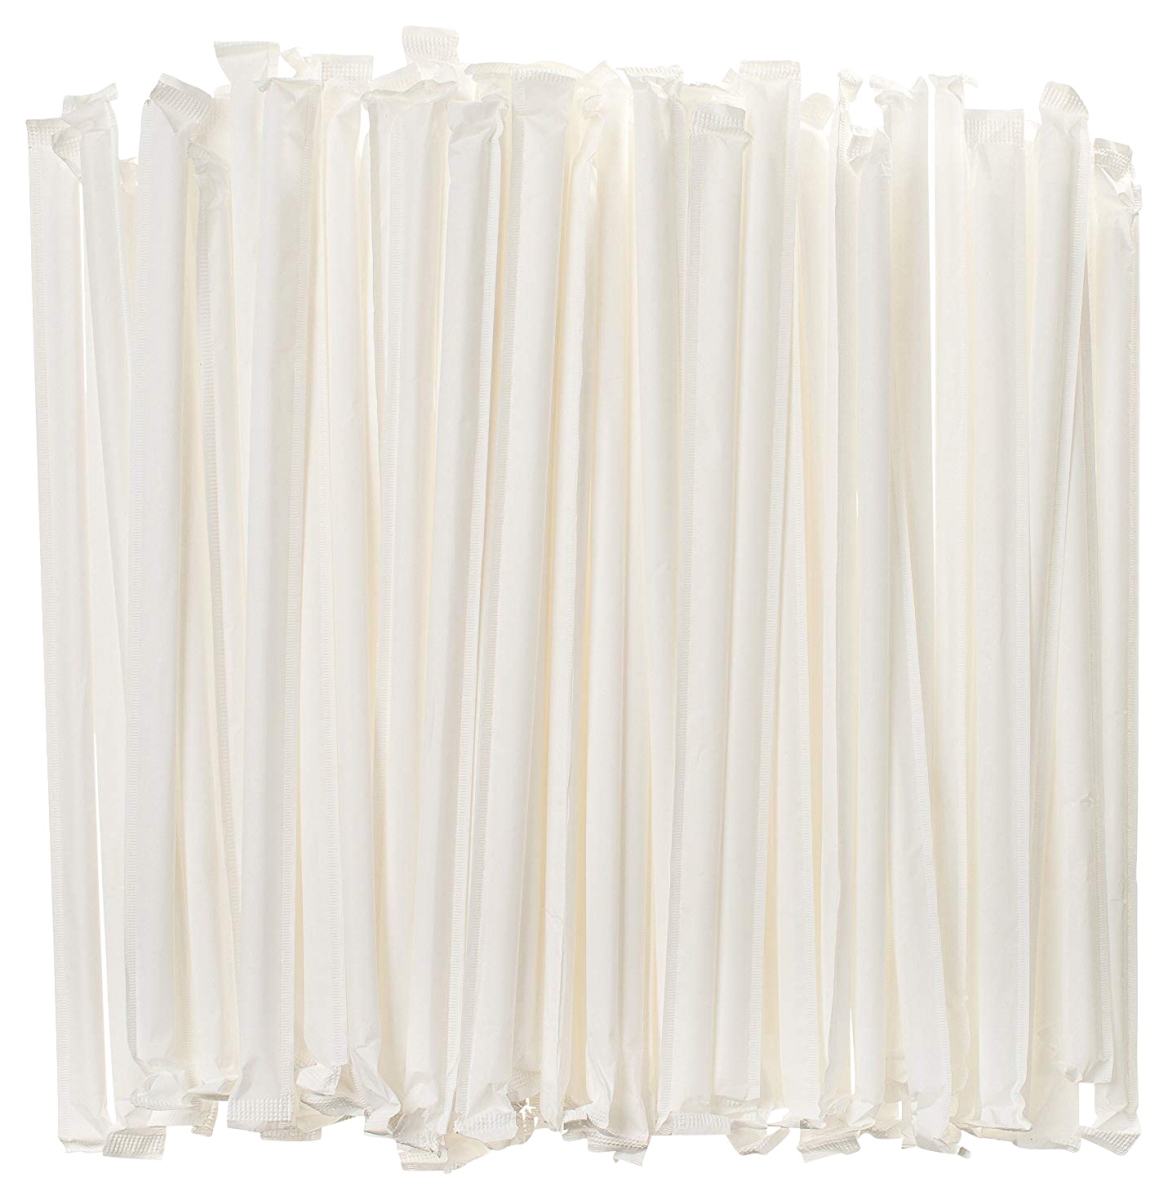 2013722 10.25 In. Wrapped Paper Straws, White - Pack Of 300